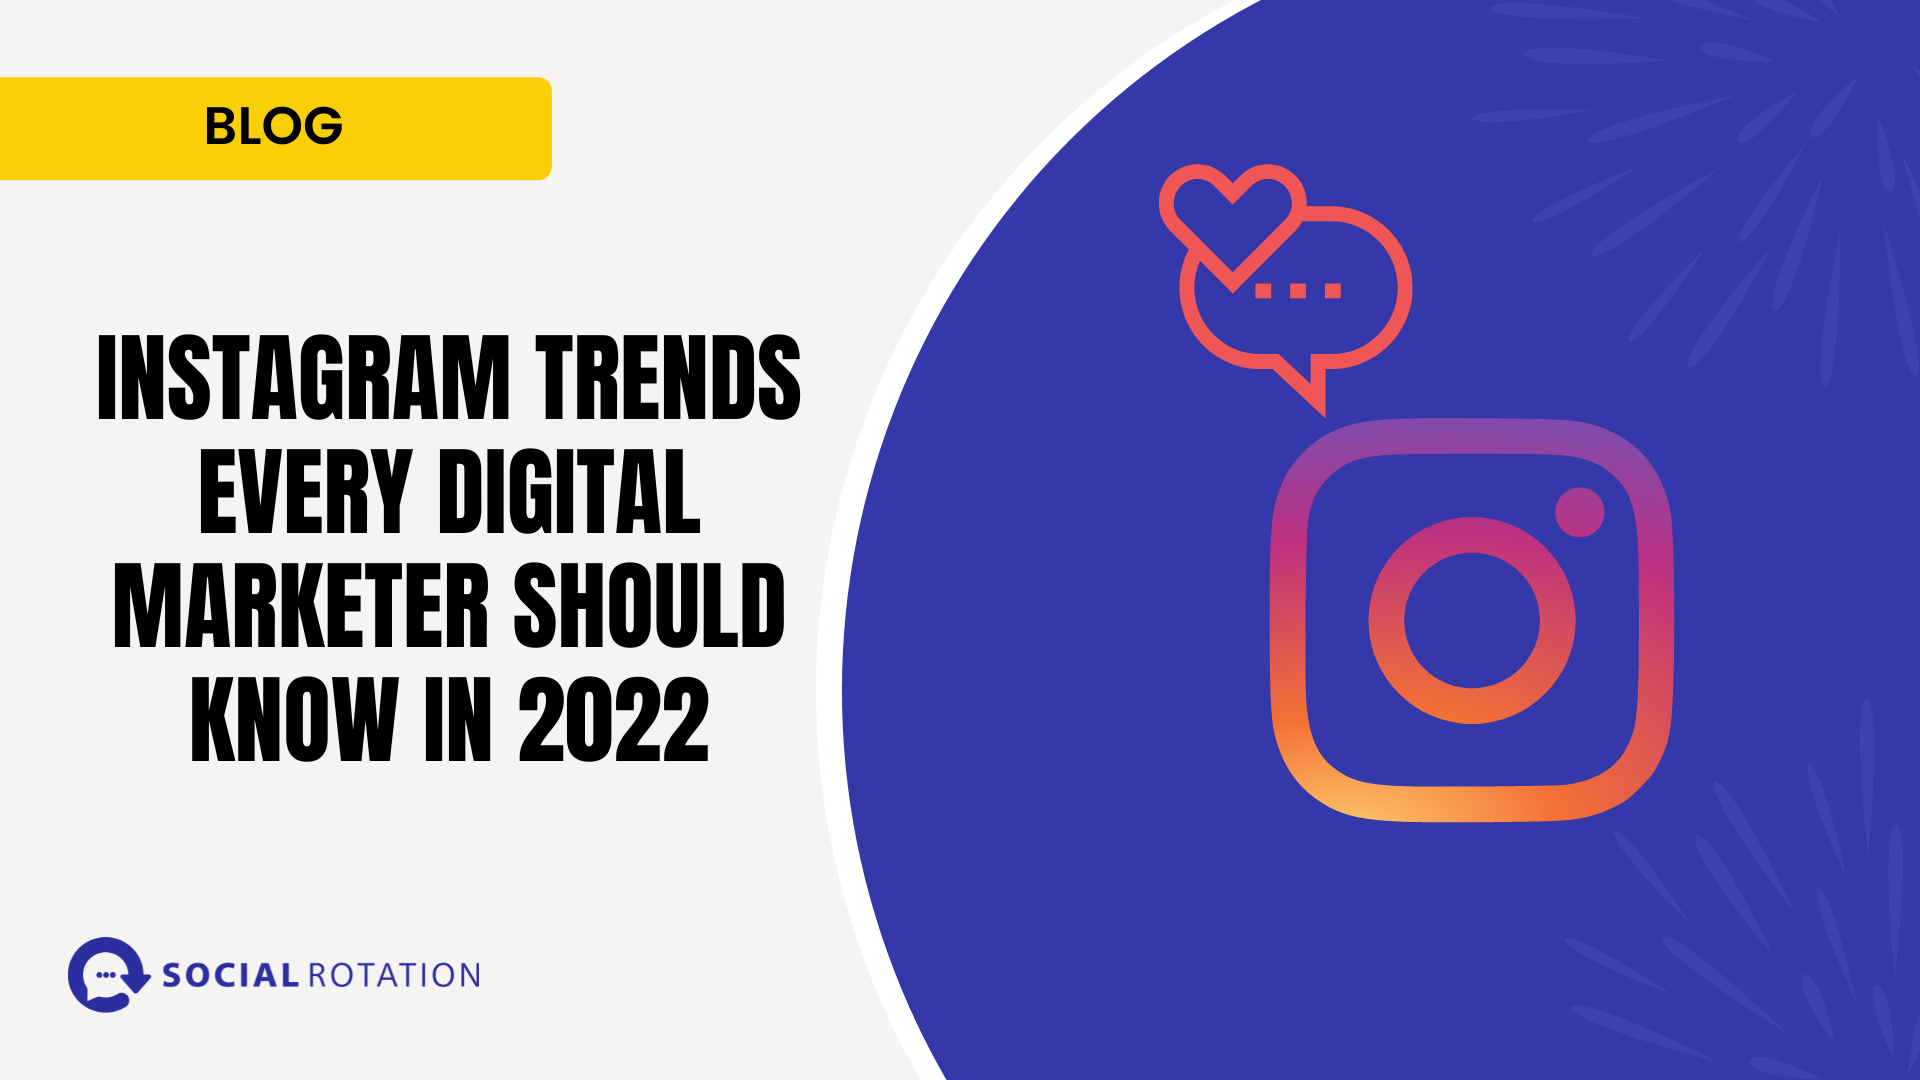 Current Instagram Features And Trends Every Digital Marketer Should ...